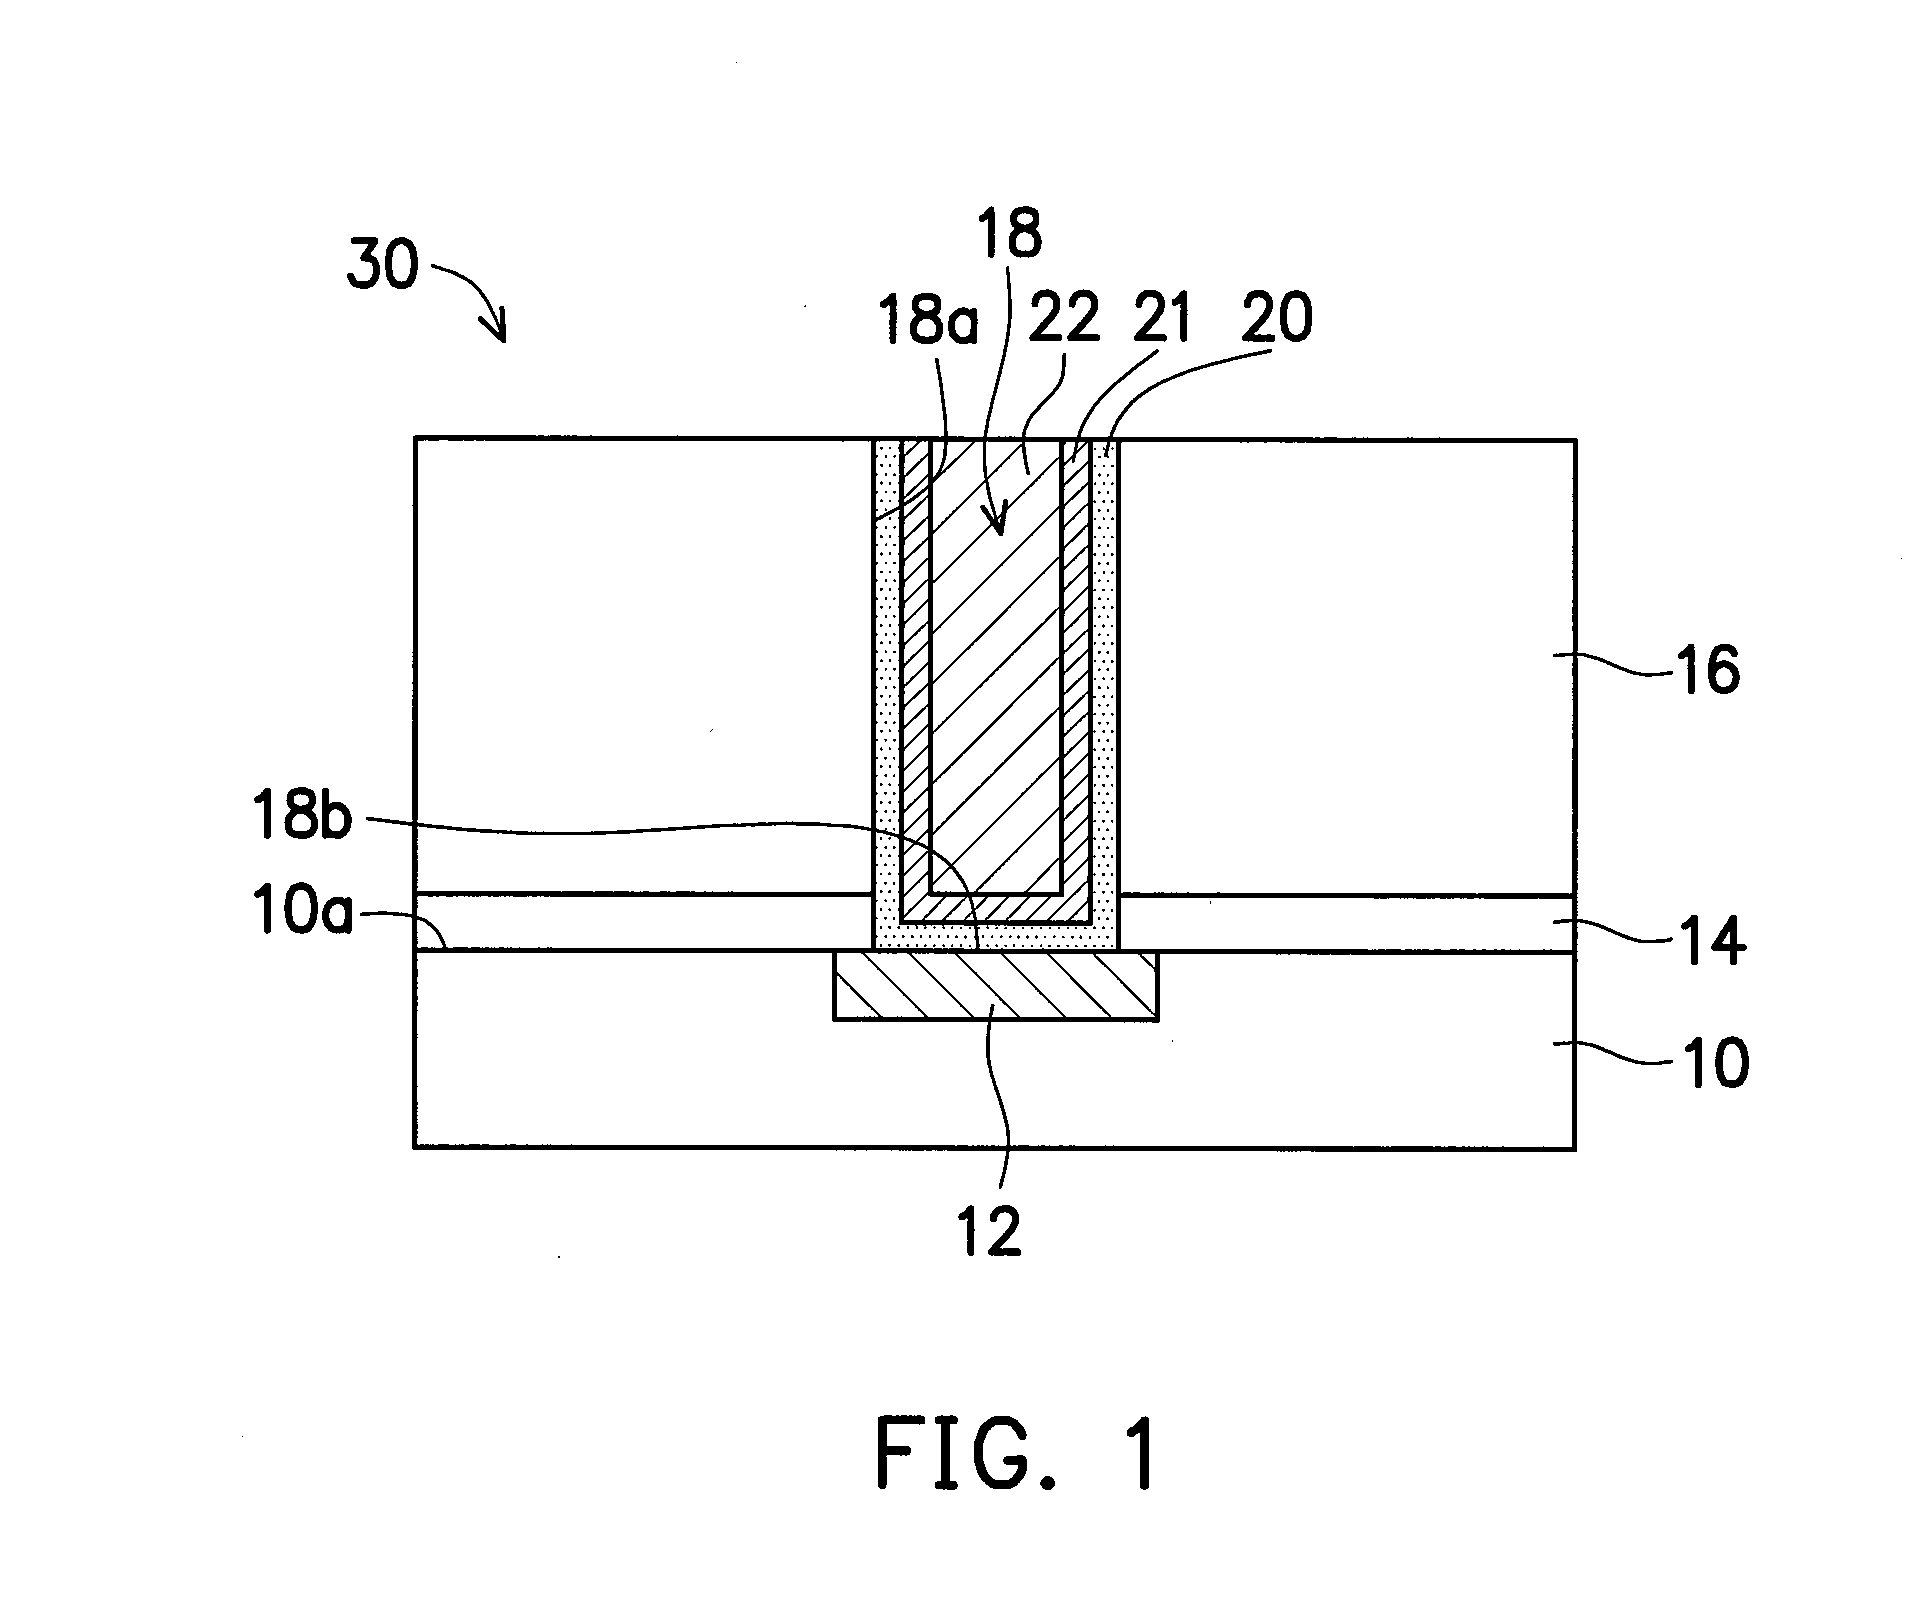 Single metal damascene structure and method of forming the same